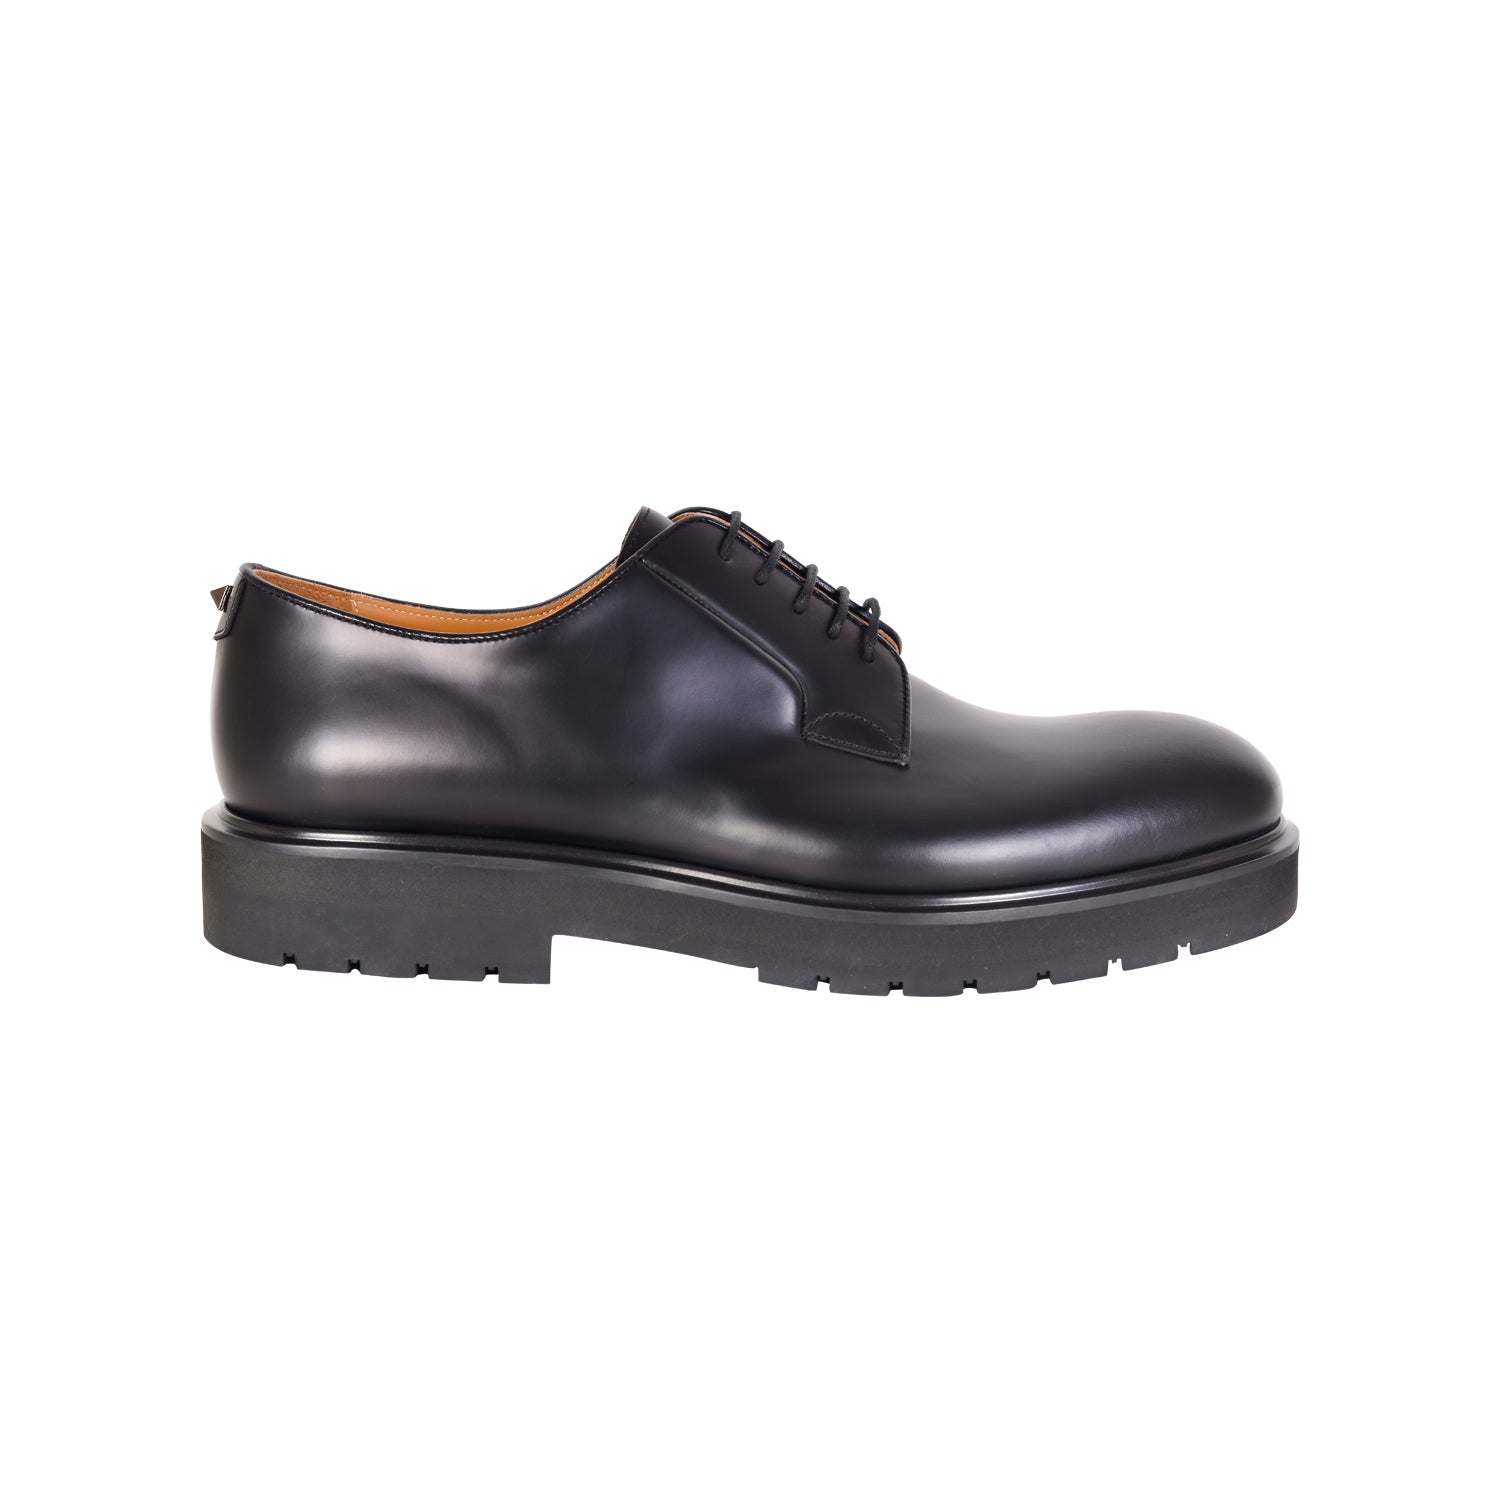 VALENTINO Black Derby Shoes with Applied Stud